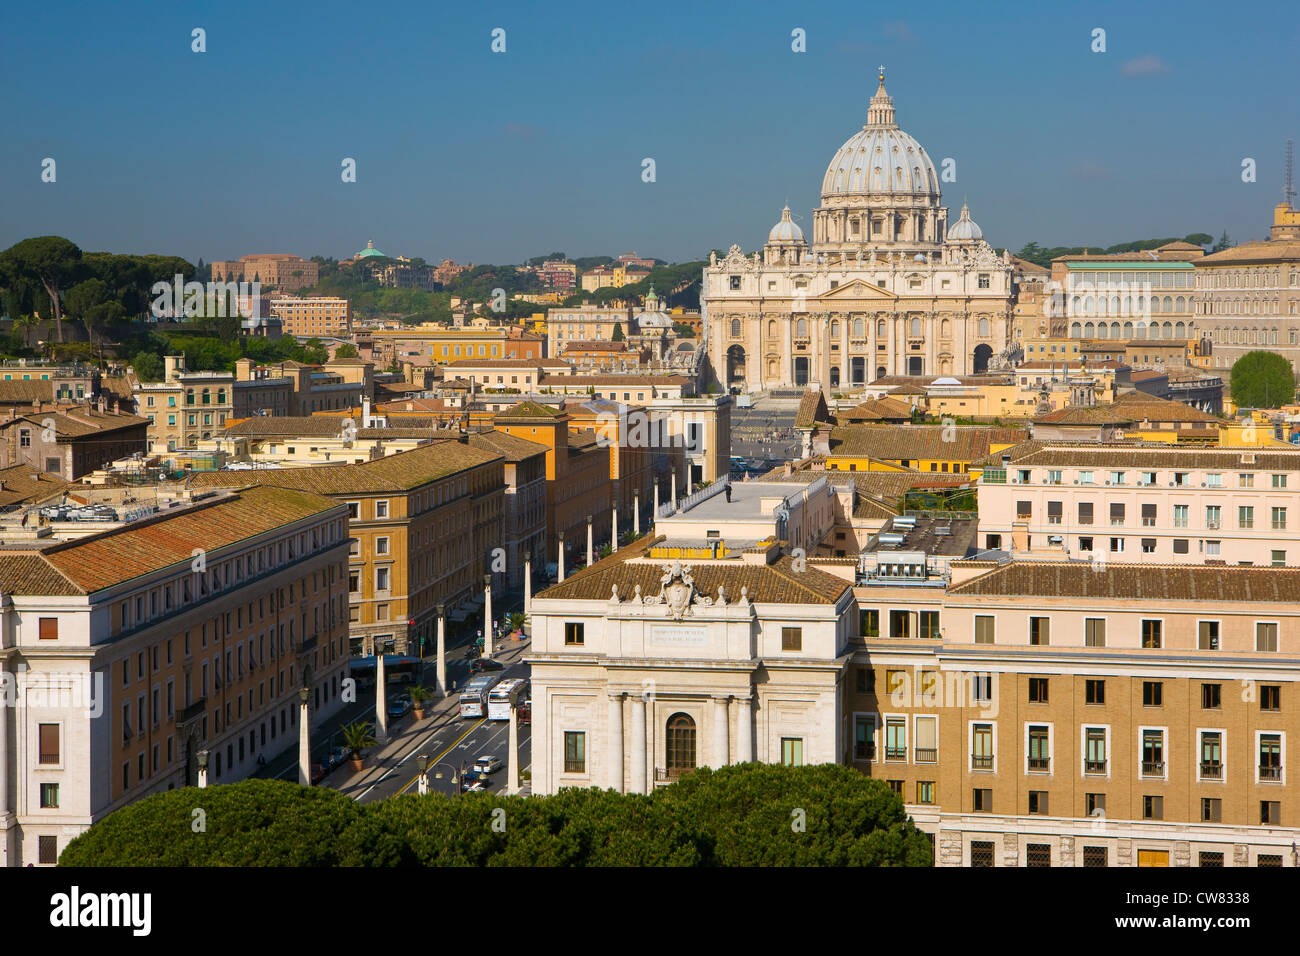 Elevated view of Vatican City and Saint Peter's Basilica, Rome, Italy Stock Photo